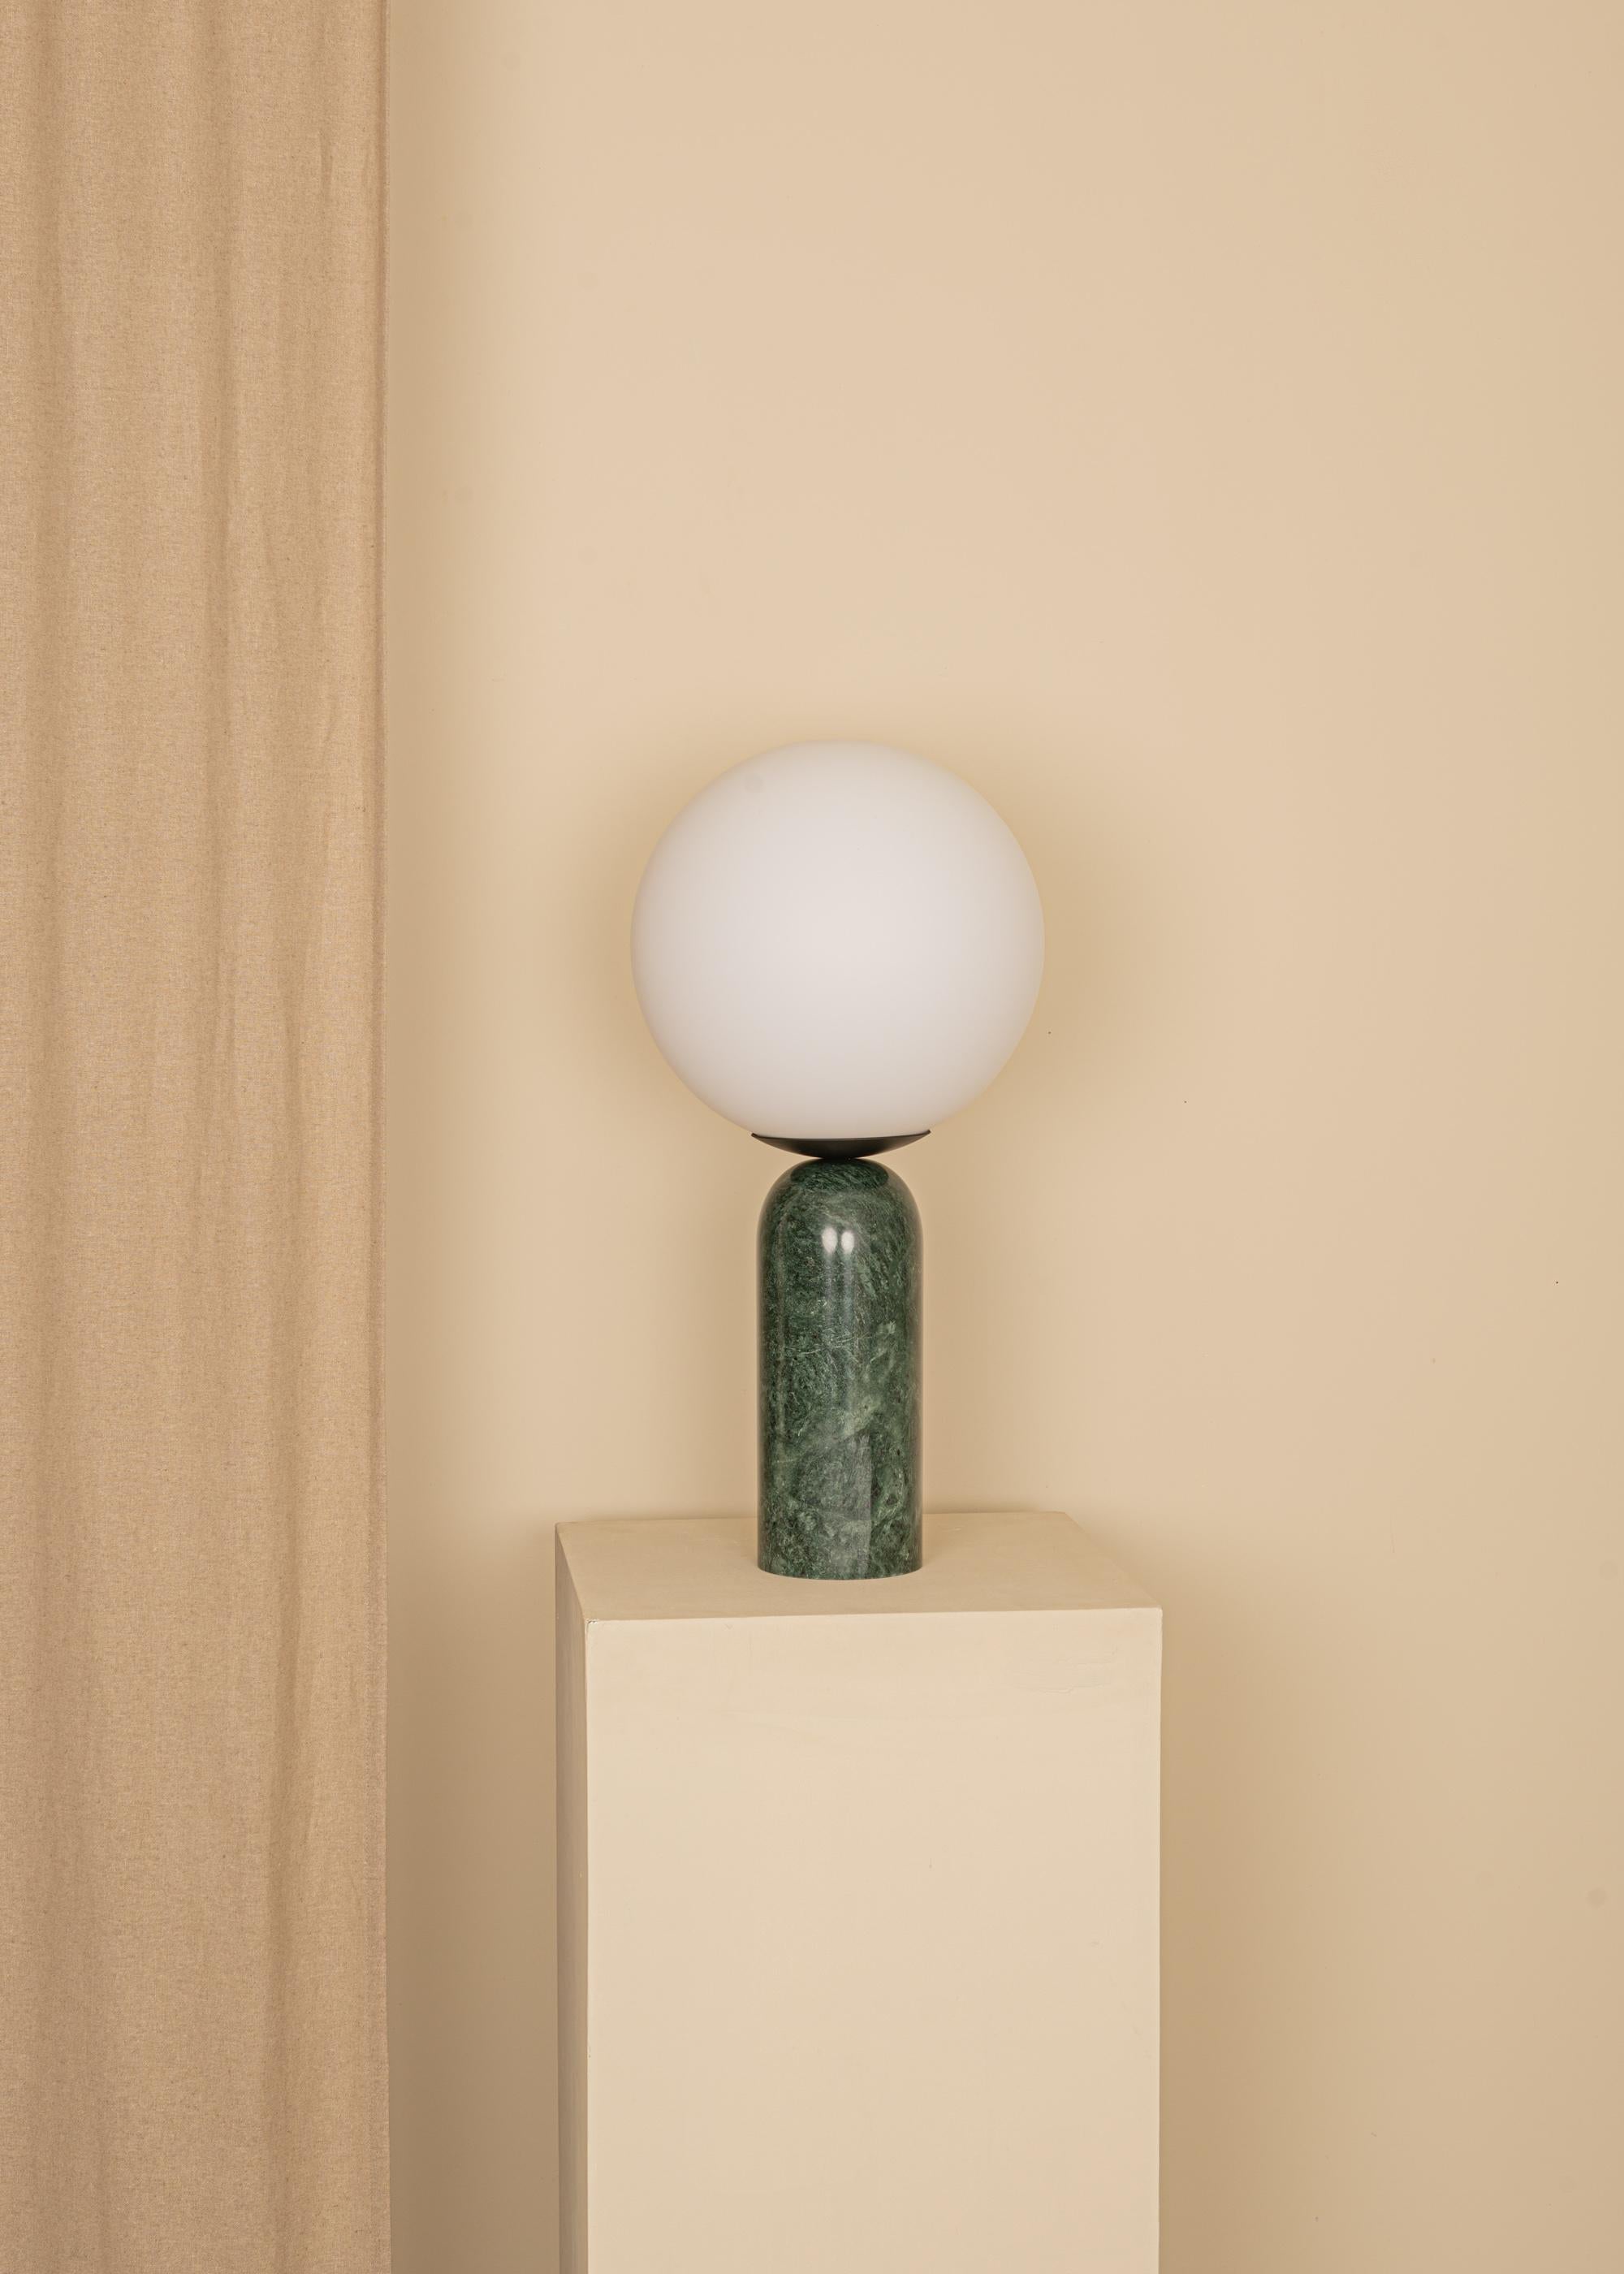 Green Marble and Steel Atlas Table Lamp by Simone & Marcel
Dimensions: Ø 30 x H 60 cm.
Materials: Glass, steel and green marble.

Also available in different marble, wood and alabaster options and finishes. Custom options available on request.